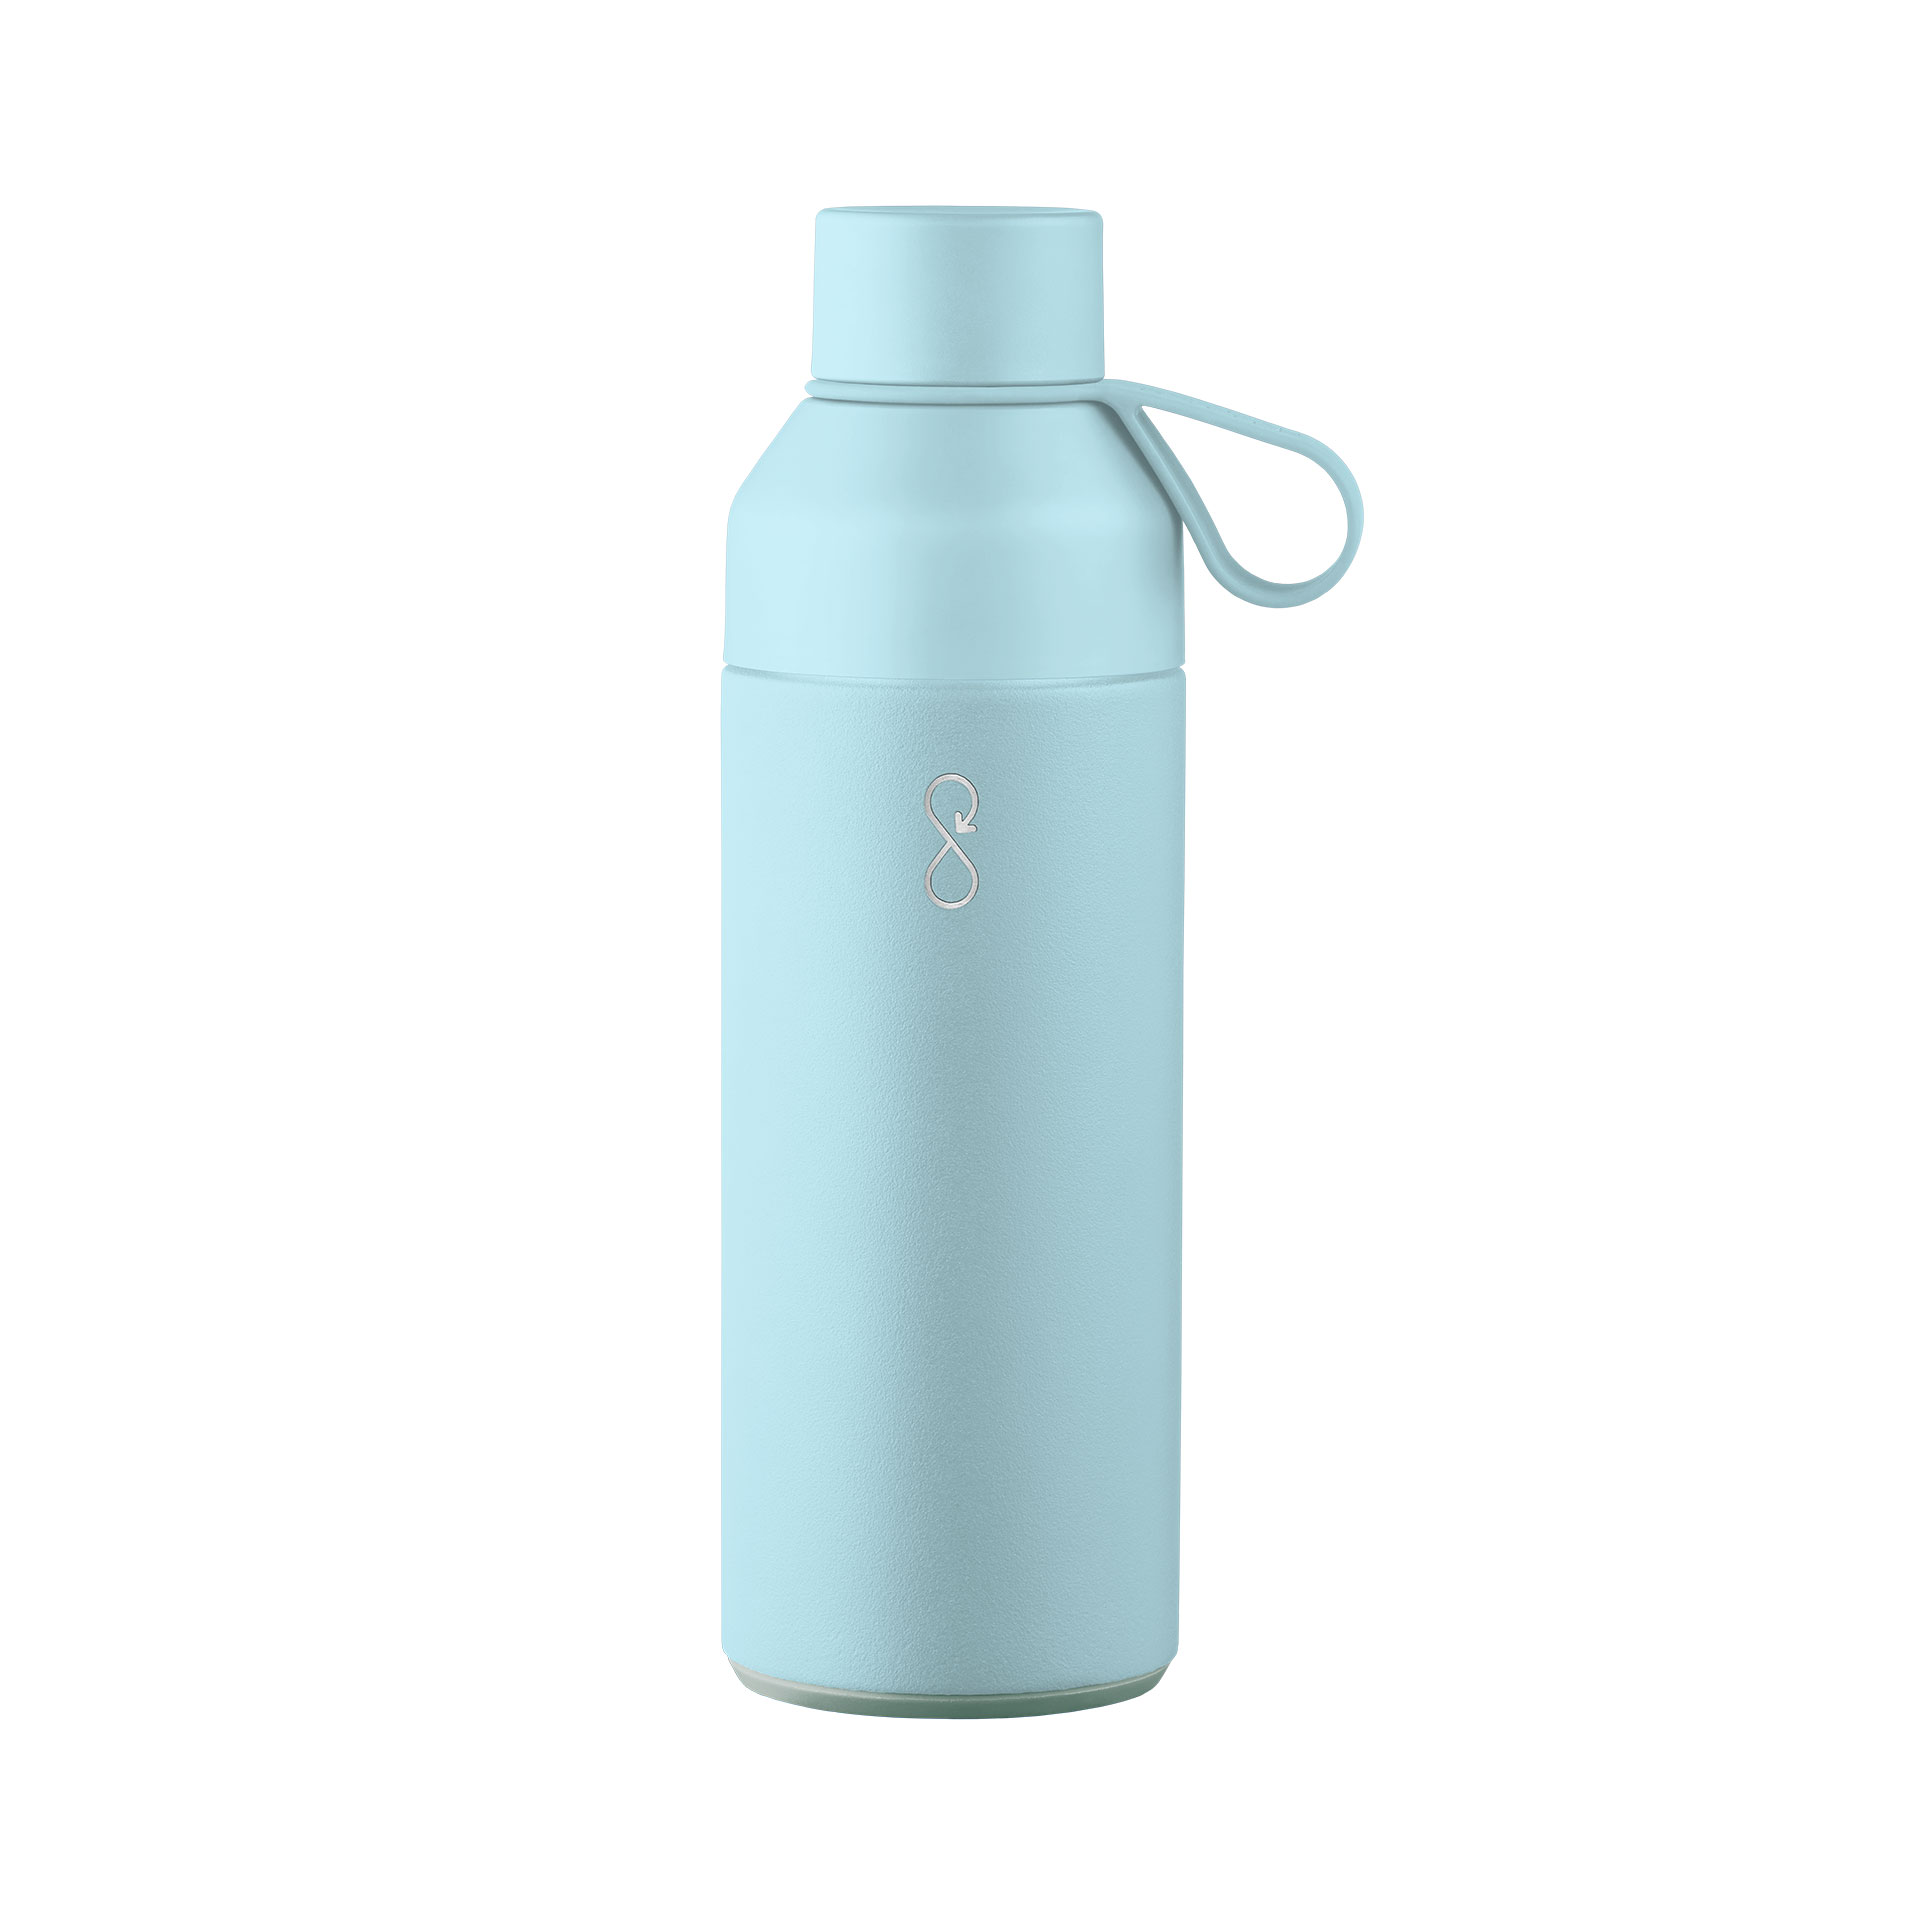 The Ocean Bottle is made from part recycled plastic and stainless steel. Each bottle funds the collection of 11.4kg of plastic, equivalent to 1000 plastic bottles. Plastic Bank ensures that the plastic waste is collected by locals living in coastal communities, mostly in Asia. This bottle is vacuum thermos insulated, this means it keeps cold drinks cold and hot drinks hot. It comes with an easy carry silicone loop, double opening for easy drink and a clean drinking cup. Dishwasher safe. 500ml capacity. Sky Blue